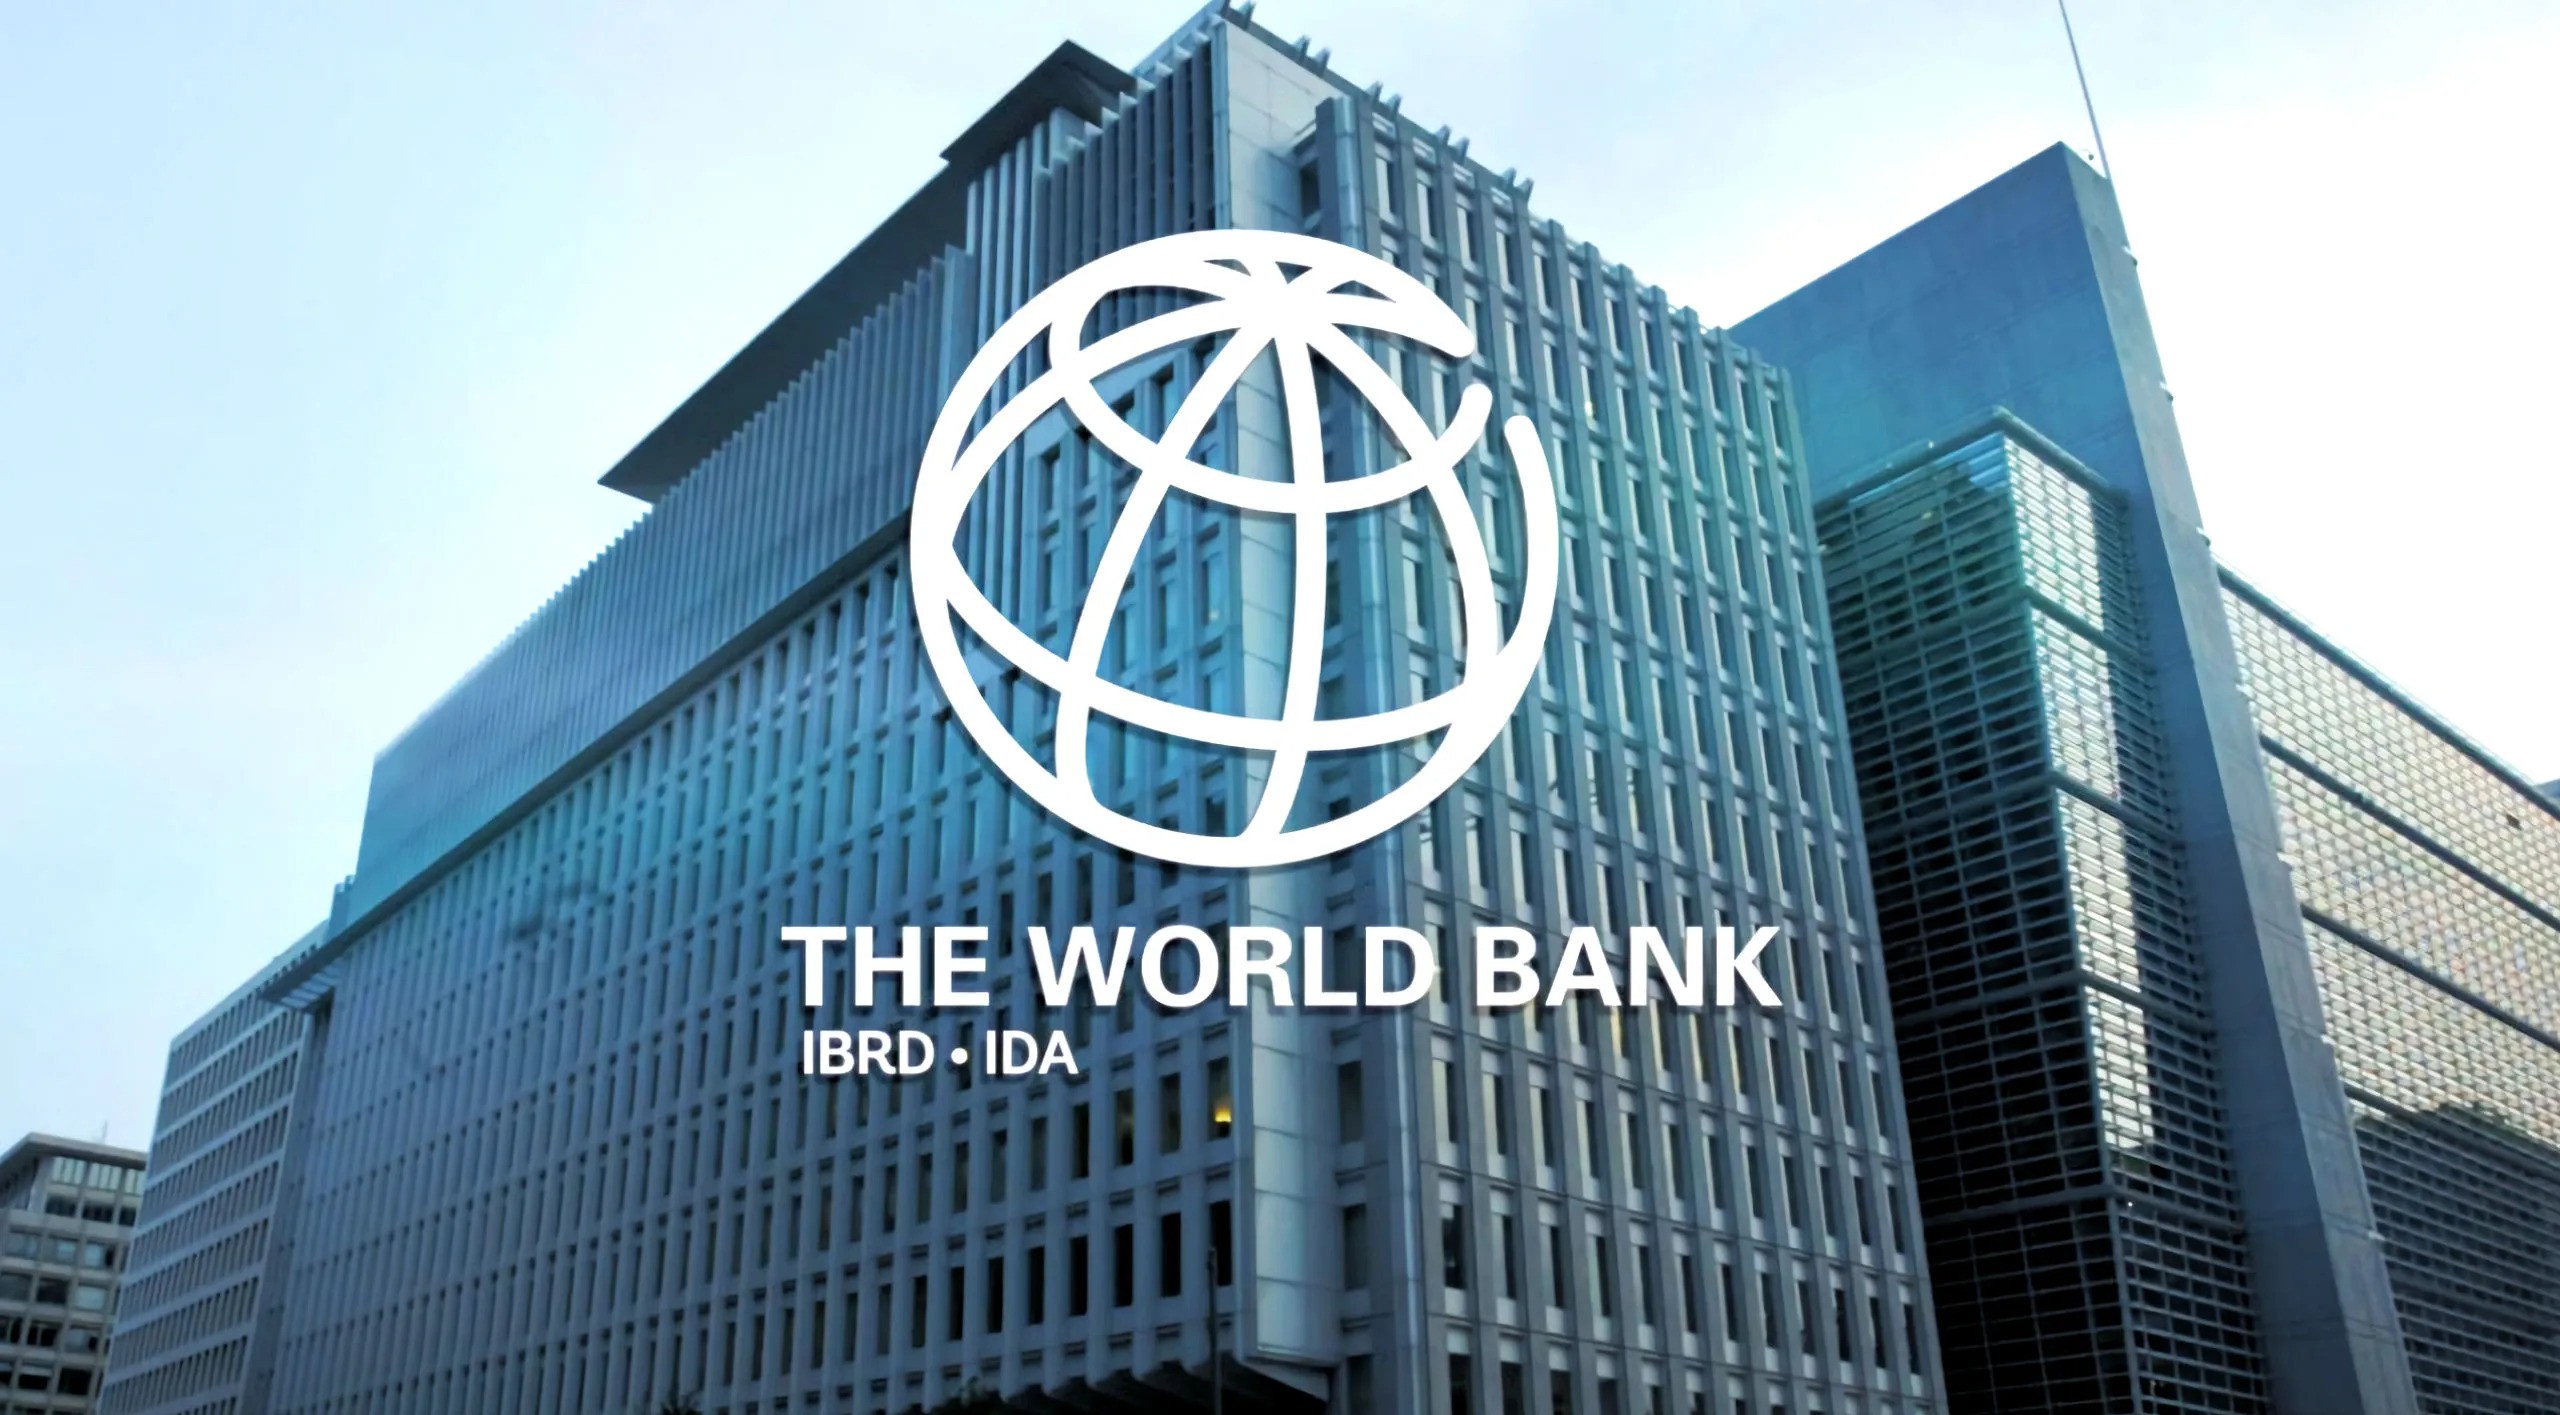 Research Assistants and Field Coordinators at WorldBank